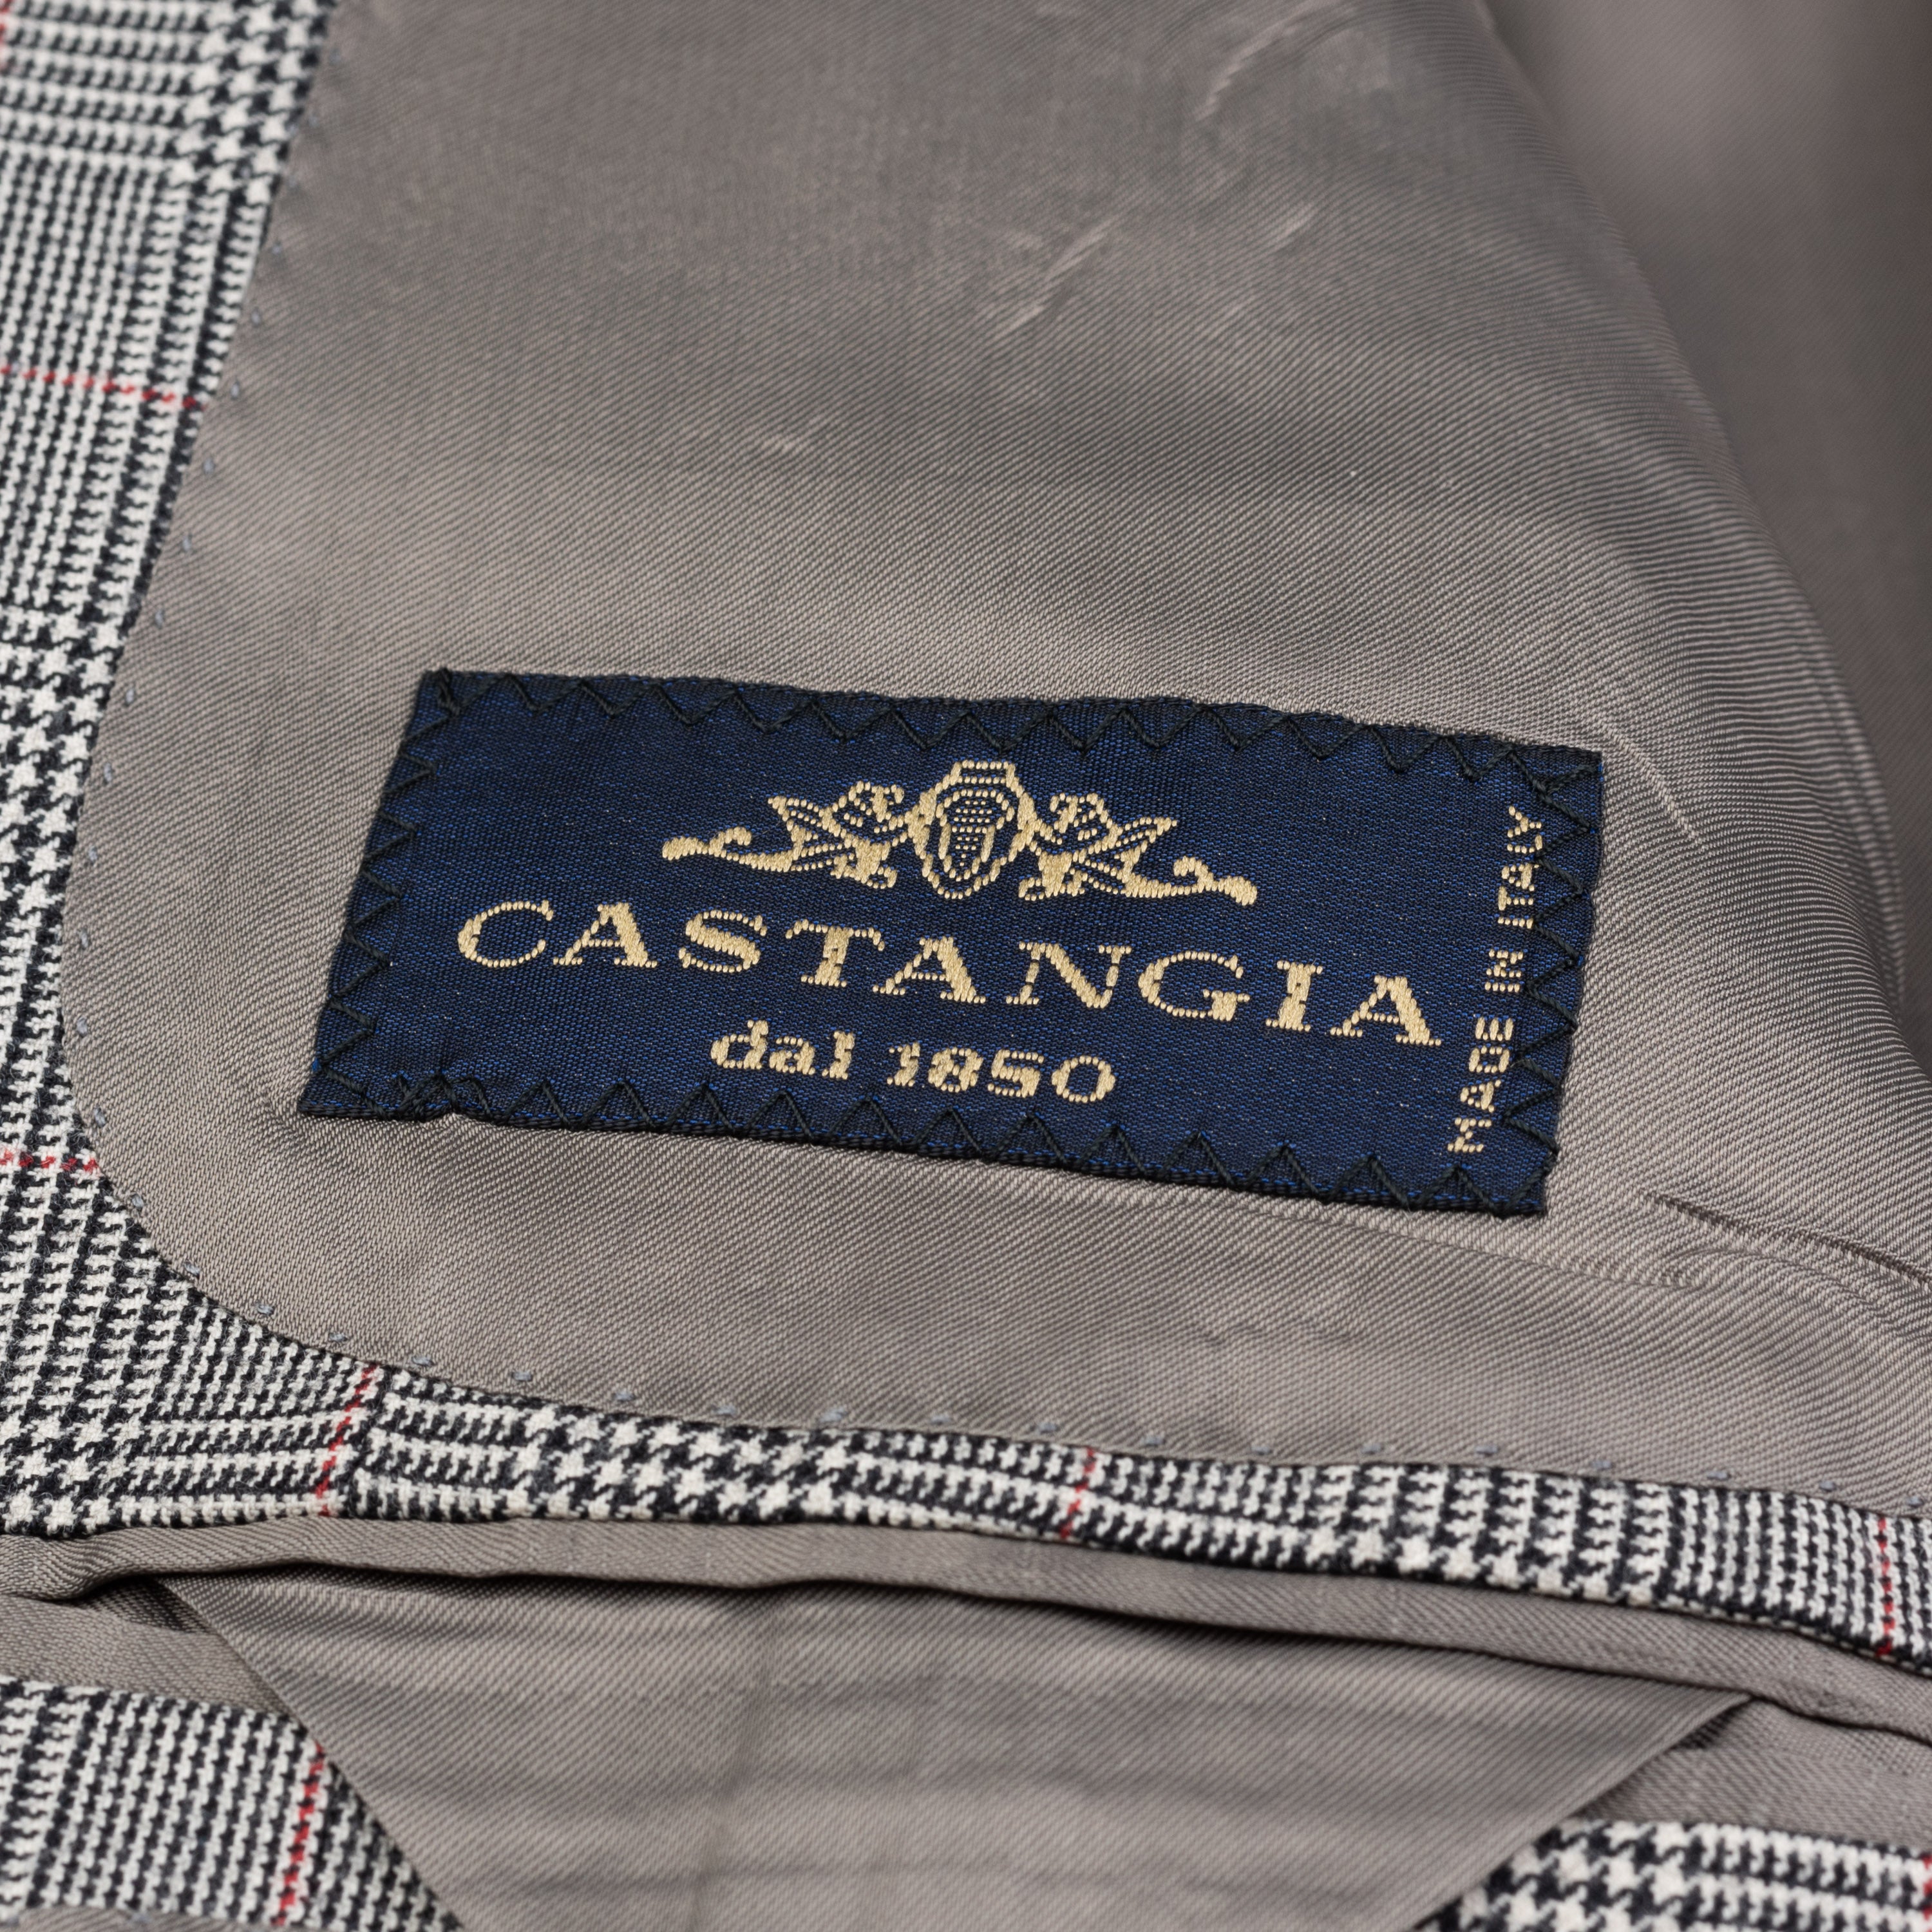 CASTANGIA 1850 Gray Prince of Wales Wool Sport Coat Jacket EU 50 NEW US 40 CASTANGIA